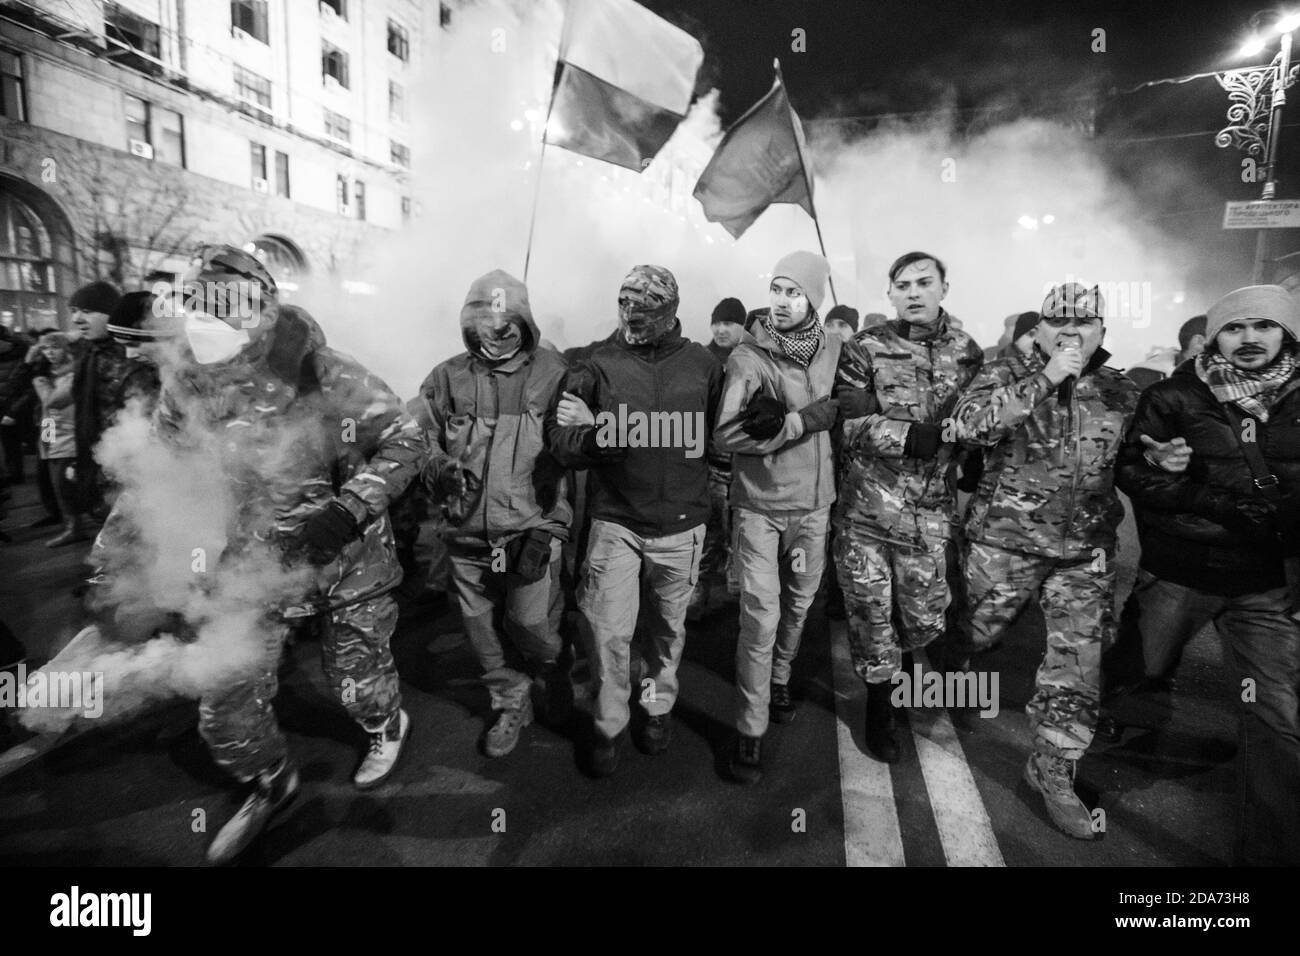 KIEV, UKRAINE - Nov 21, 2016: Activists of nationalist groups and their supporters on Independence Square as they gather to mark the anniversary of the 2014 Ukrainian pro-European Union mass protests Stock Photo